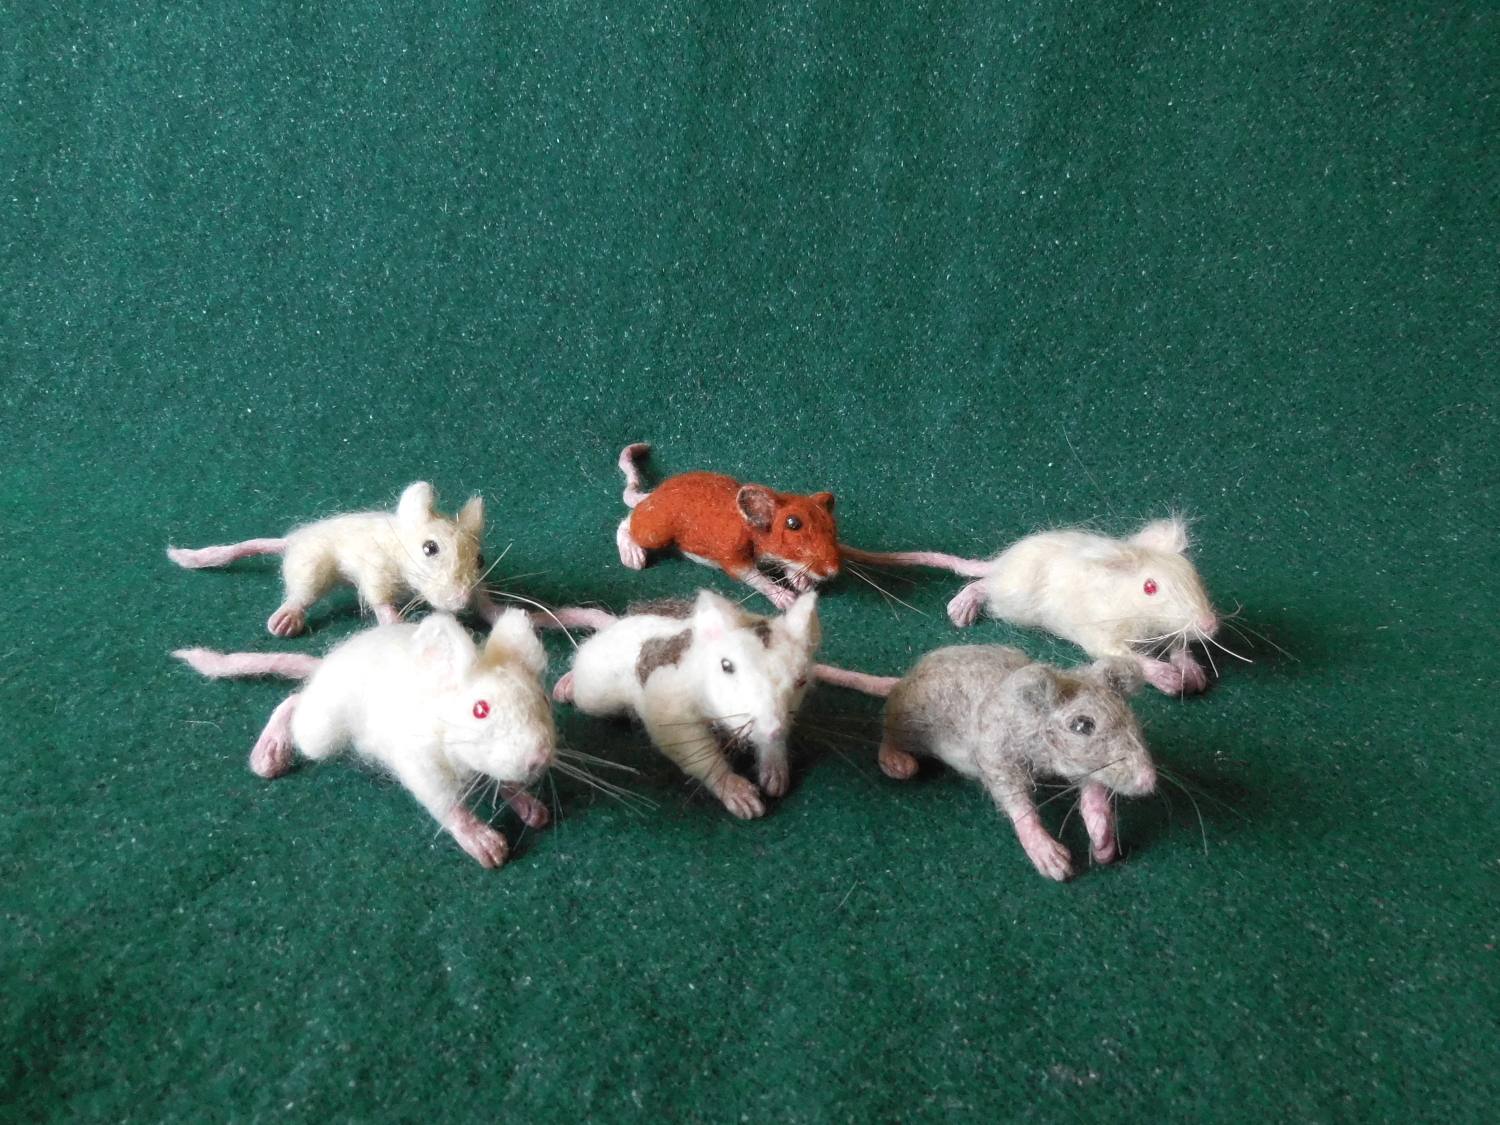 Mouse Litter 26 – More Mice